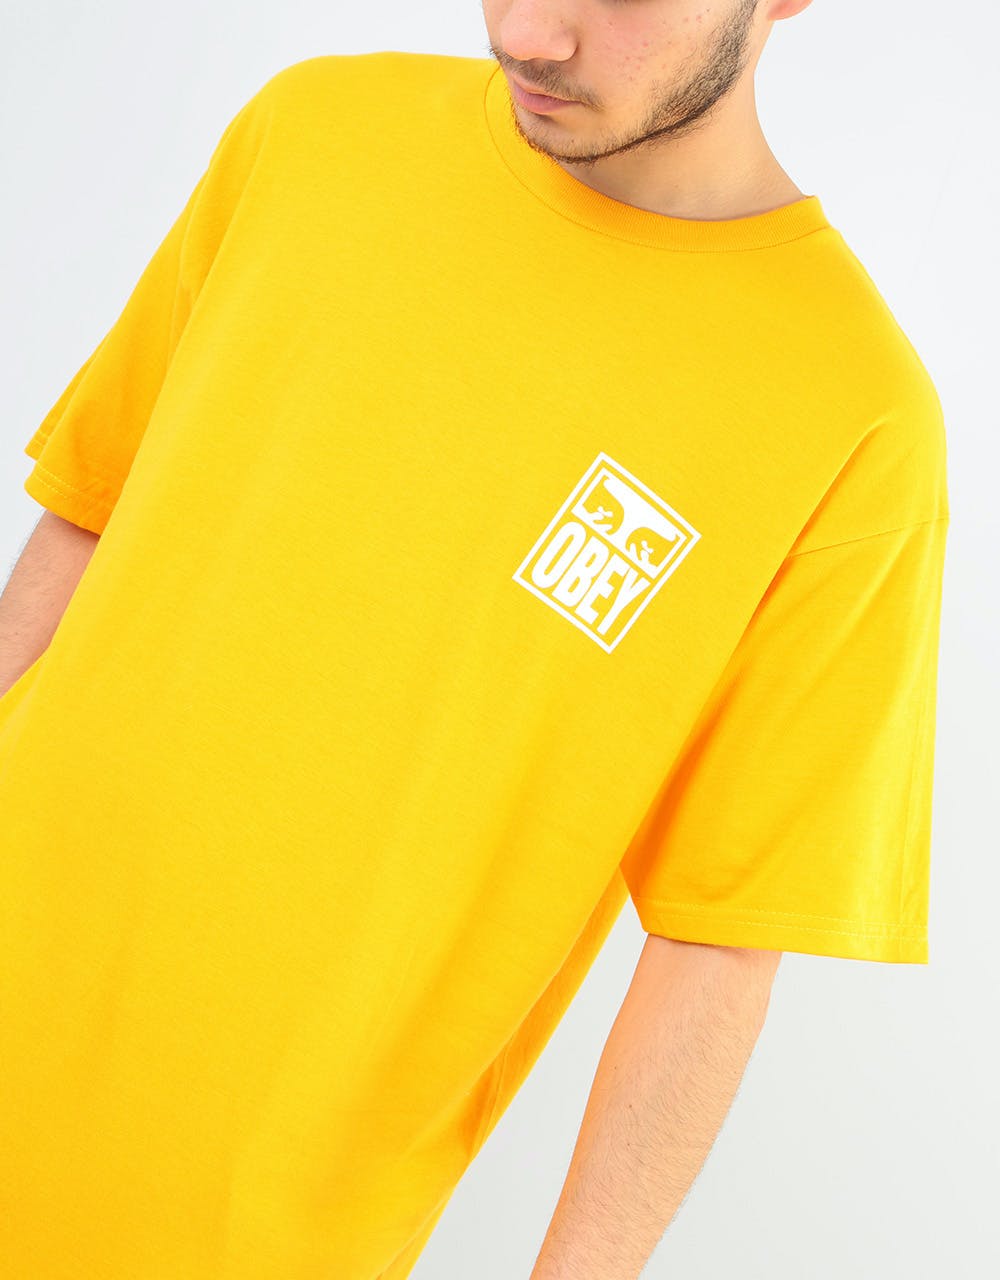 Obey Eyes Icon T-Shirt - Gold